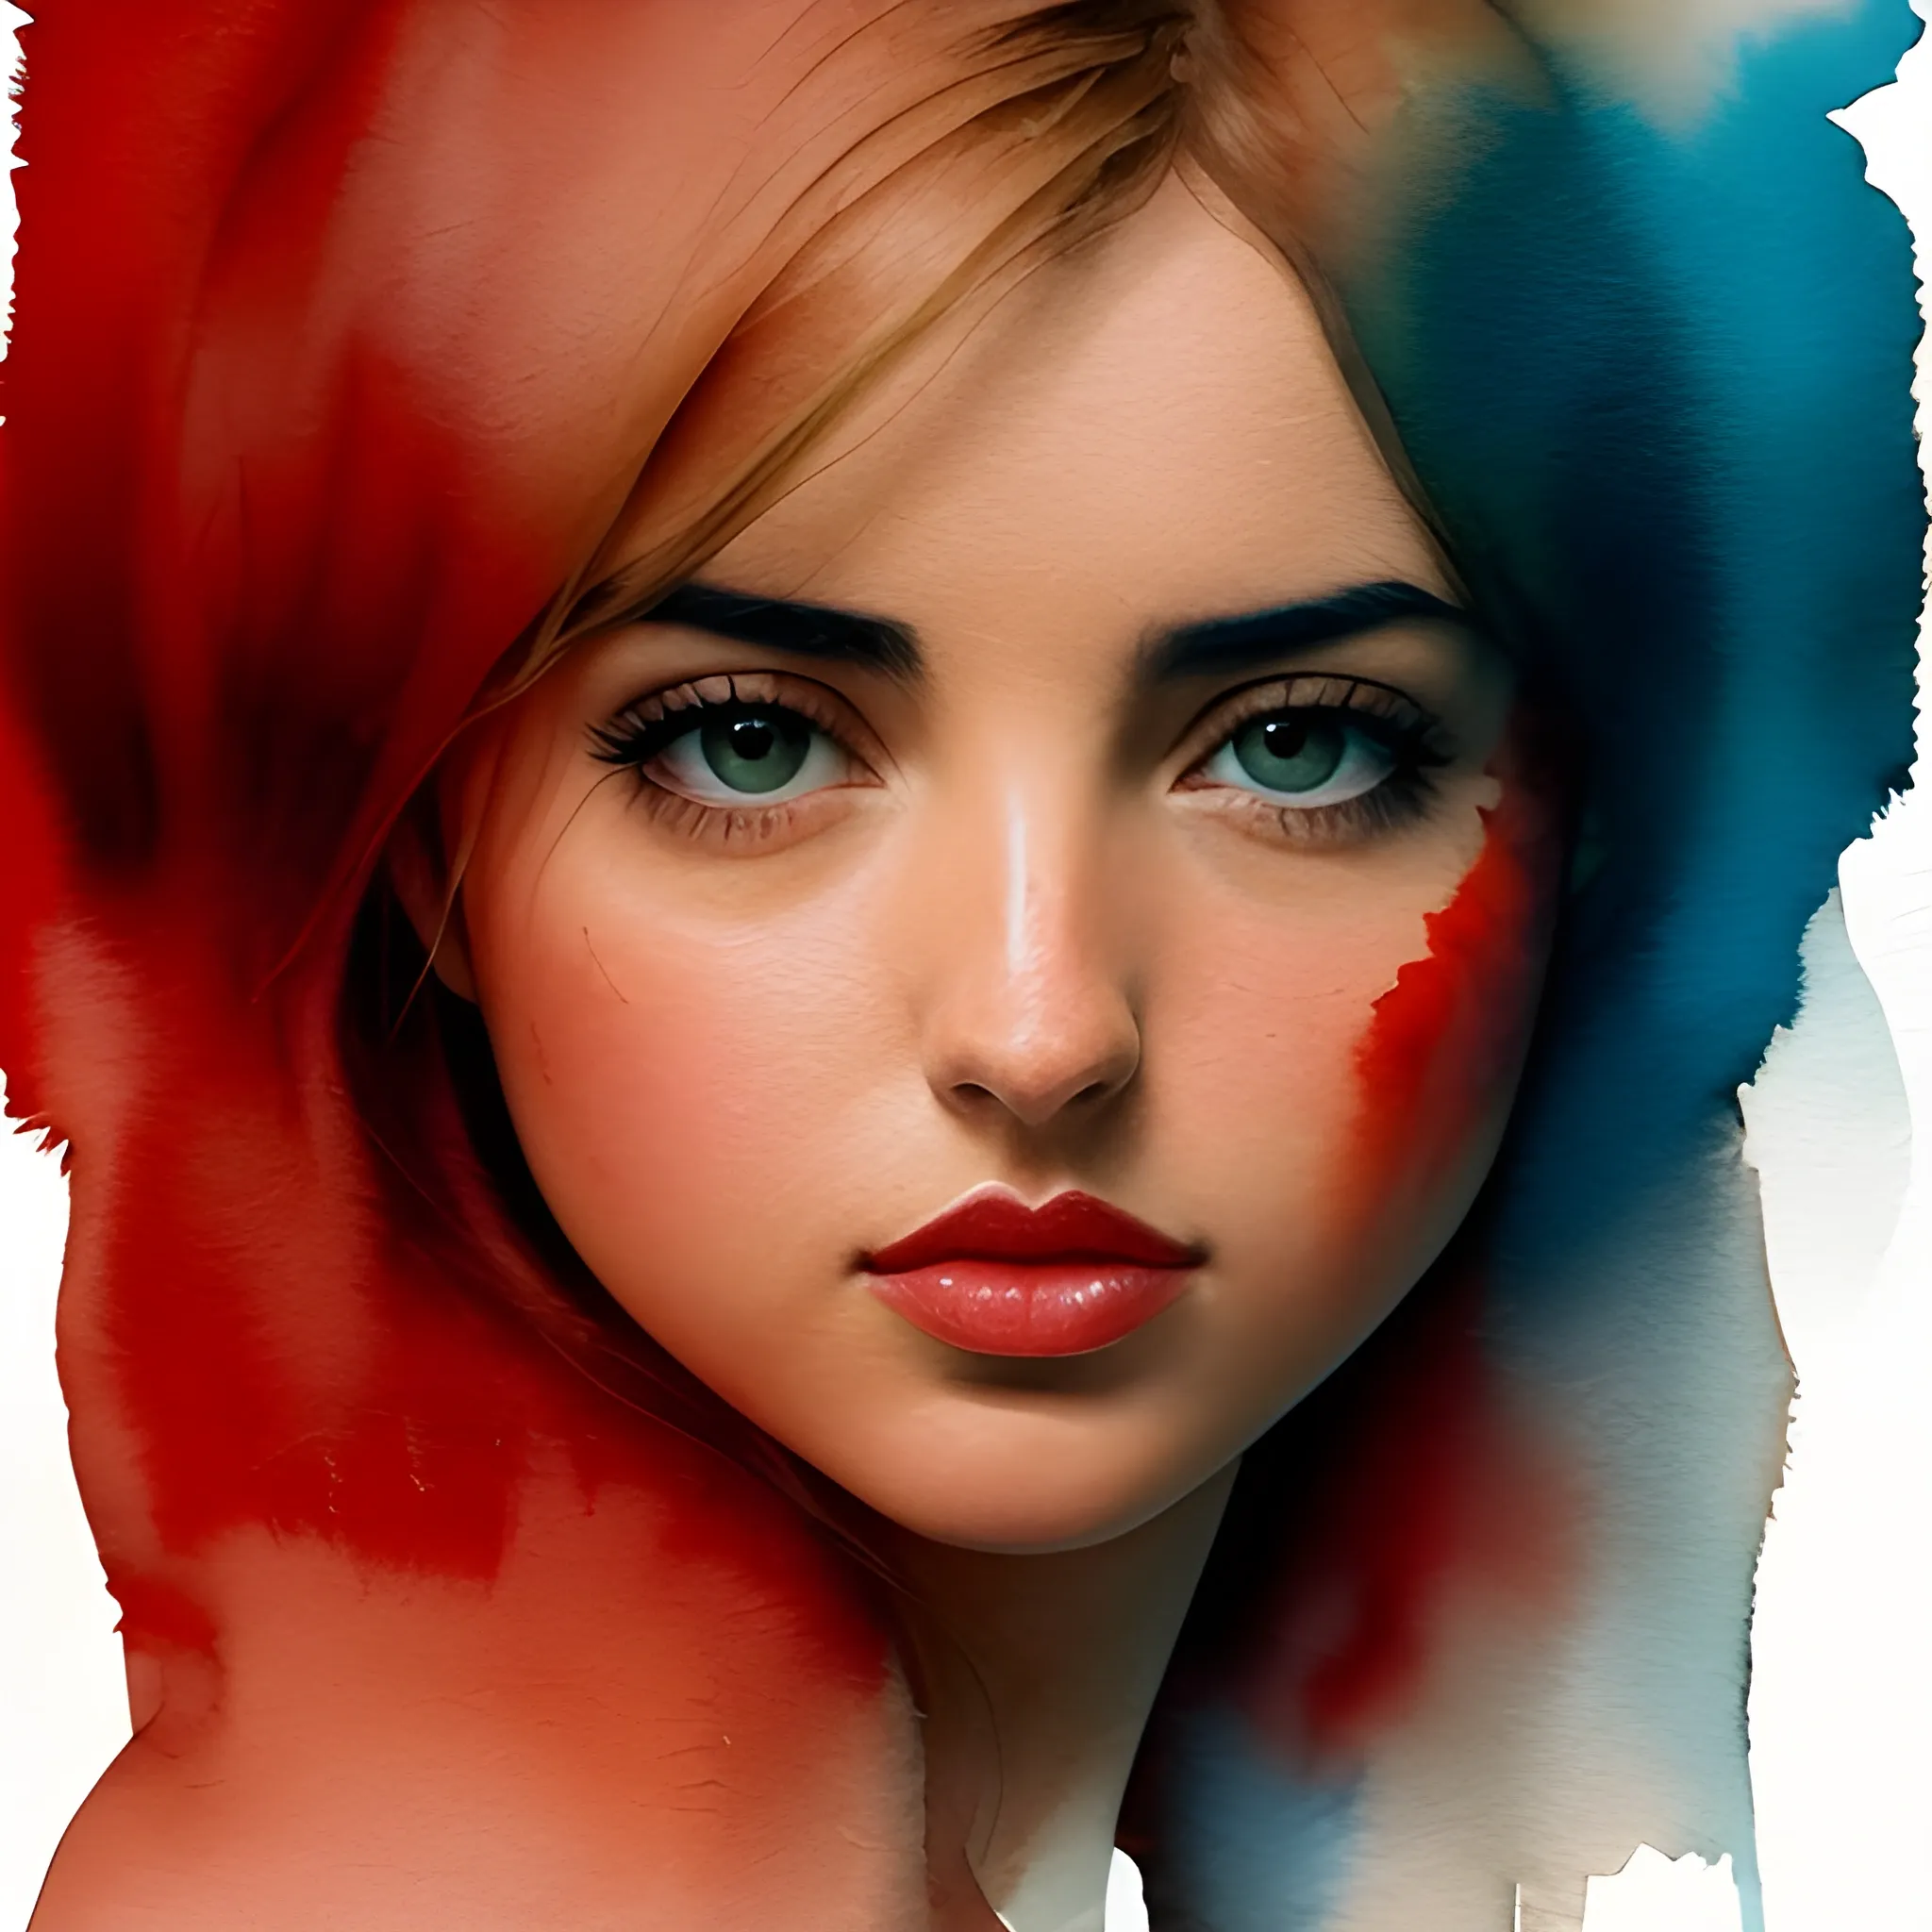 Illustrate a captivating scene with Ana de Armas, where the world and her demeanor reflect a 'scratchy' texture, creating an environment and character full of depth and intrigue. Utilize watercolor techniques reminiscent of the renowned painter J.M.W. Turner, with the predominant use of the color red to enhance the unique texture and atmosphere